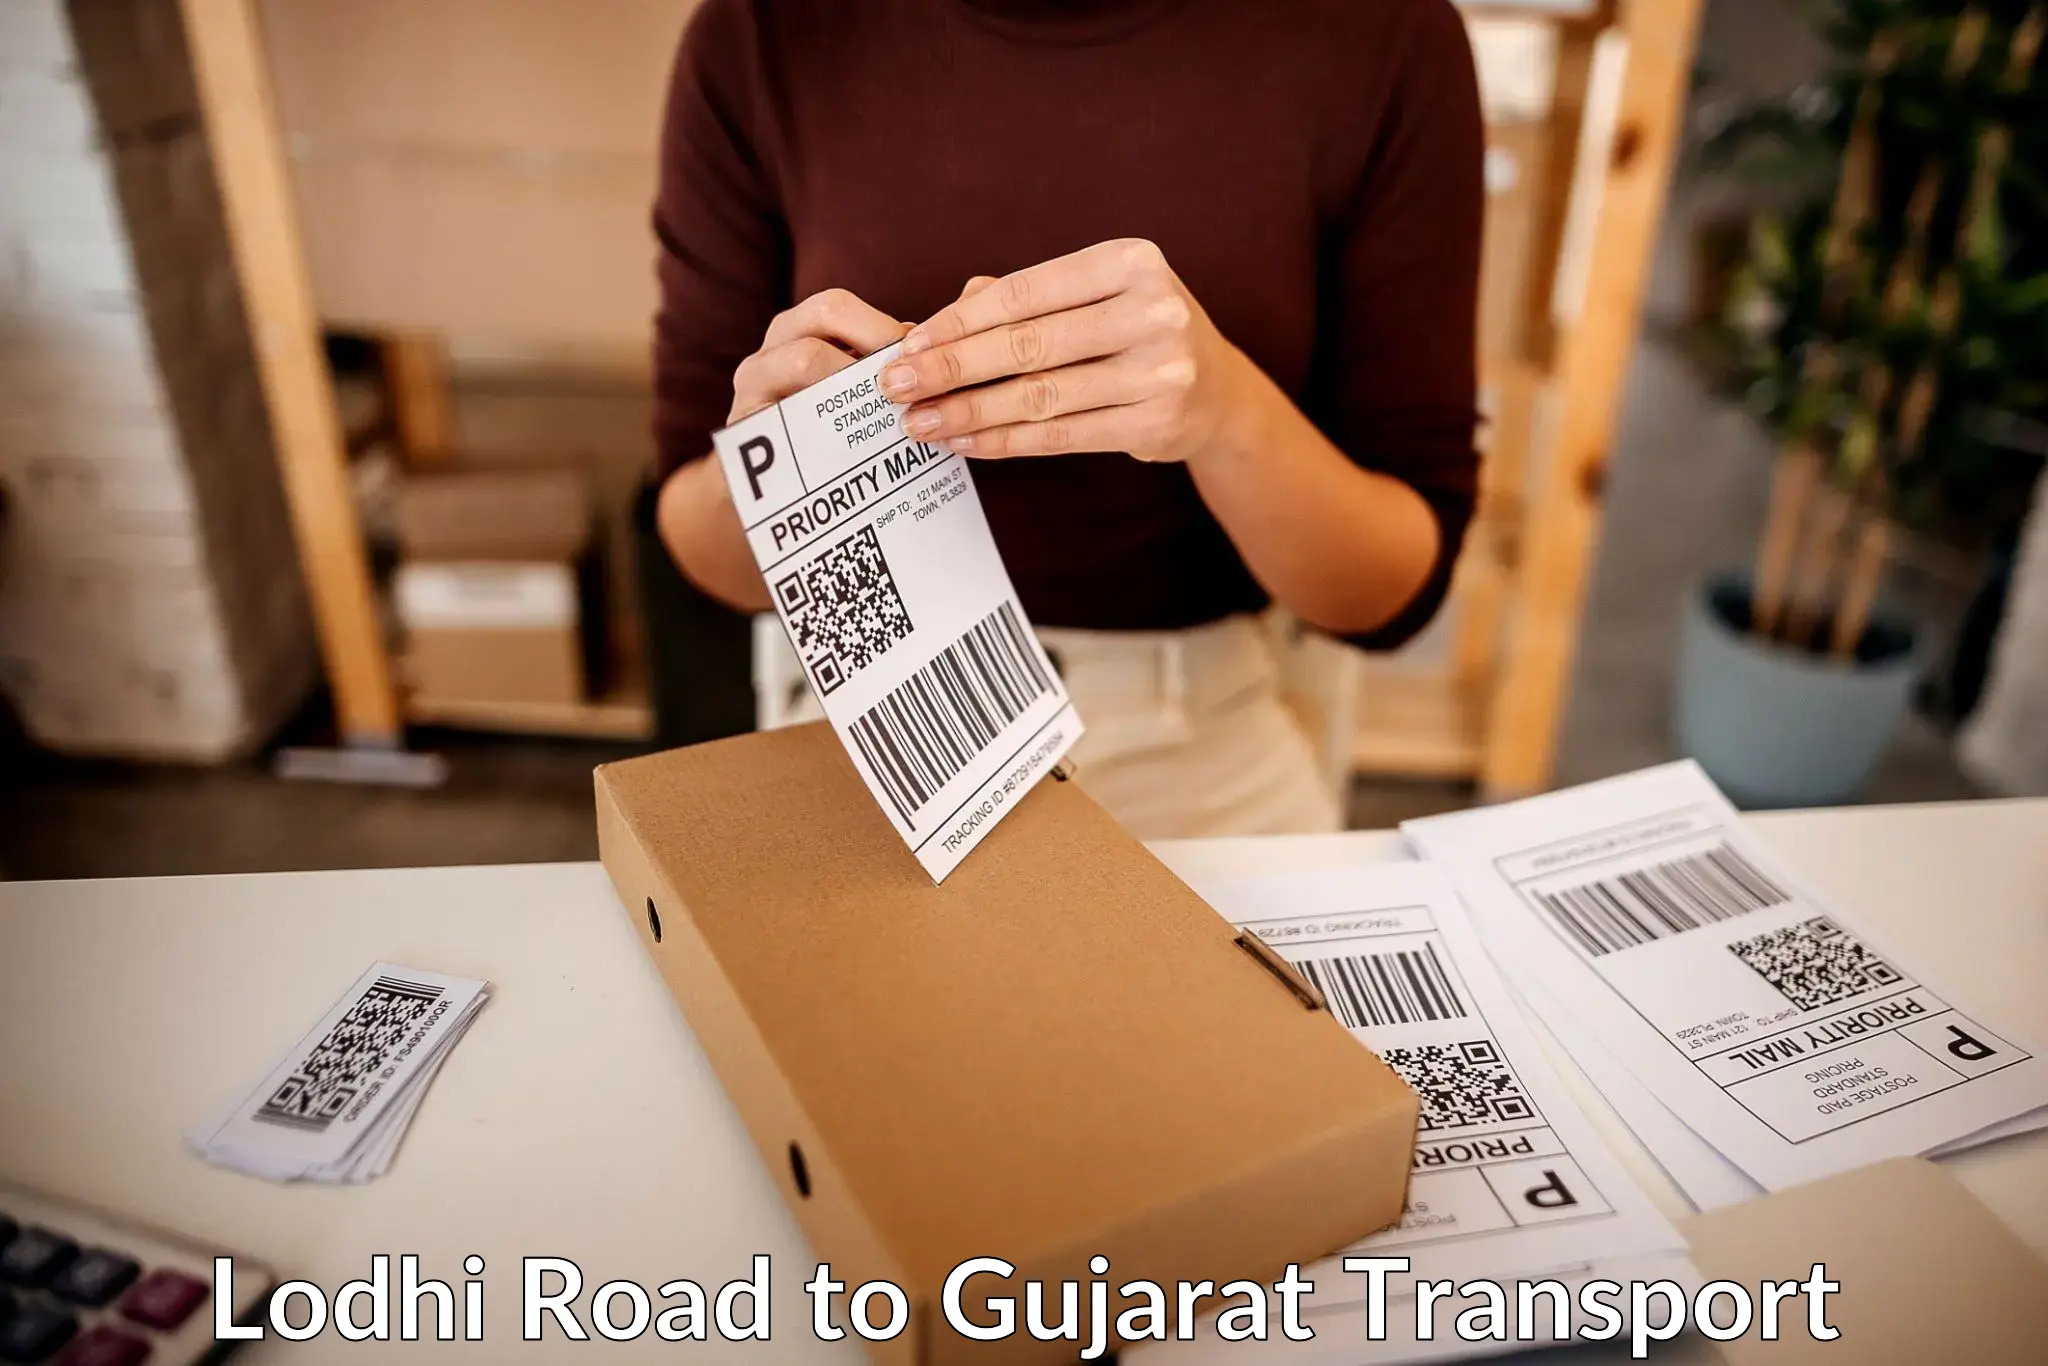 Transport bike from one state to another Lodhi Road to Gujarat